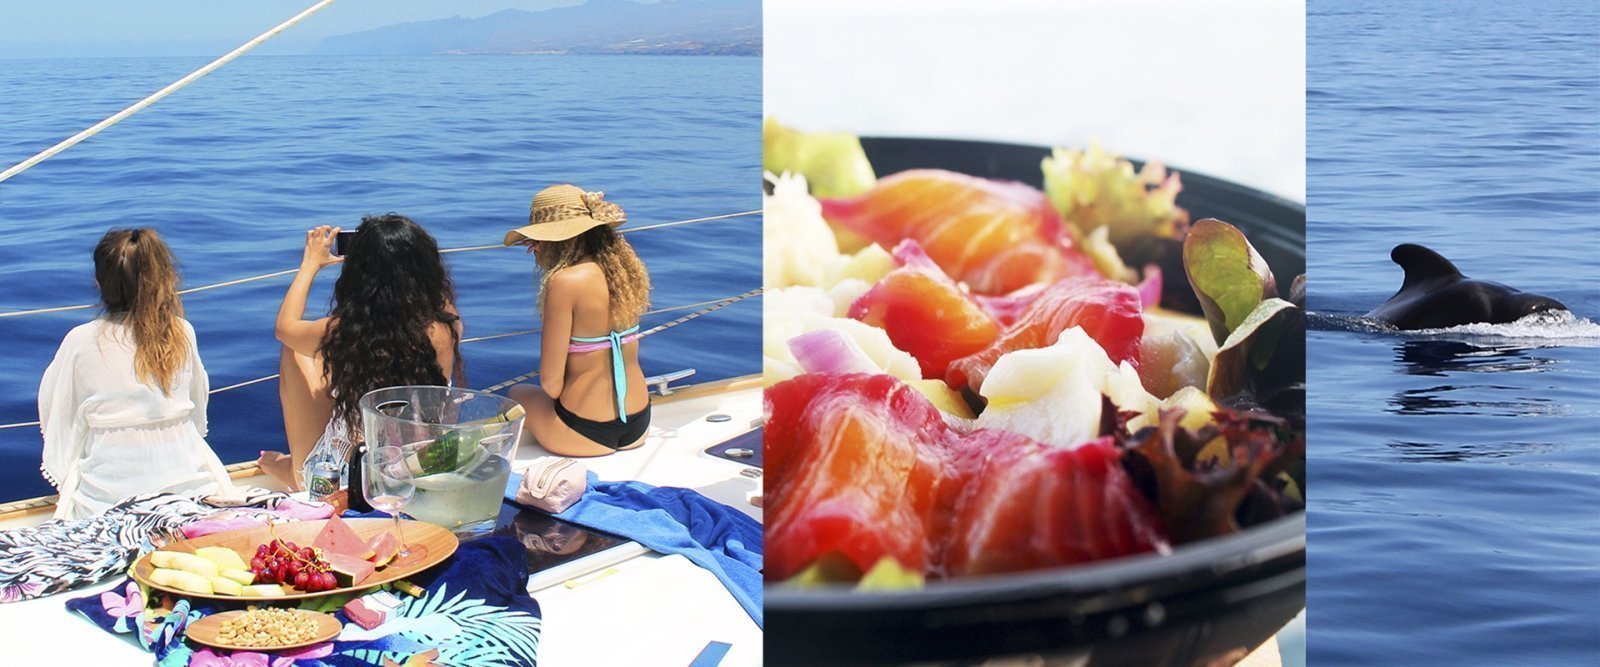 Catering - whale watching Tenerife